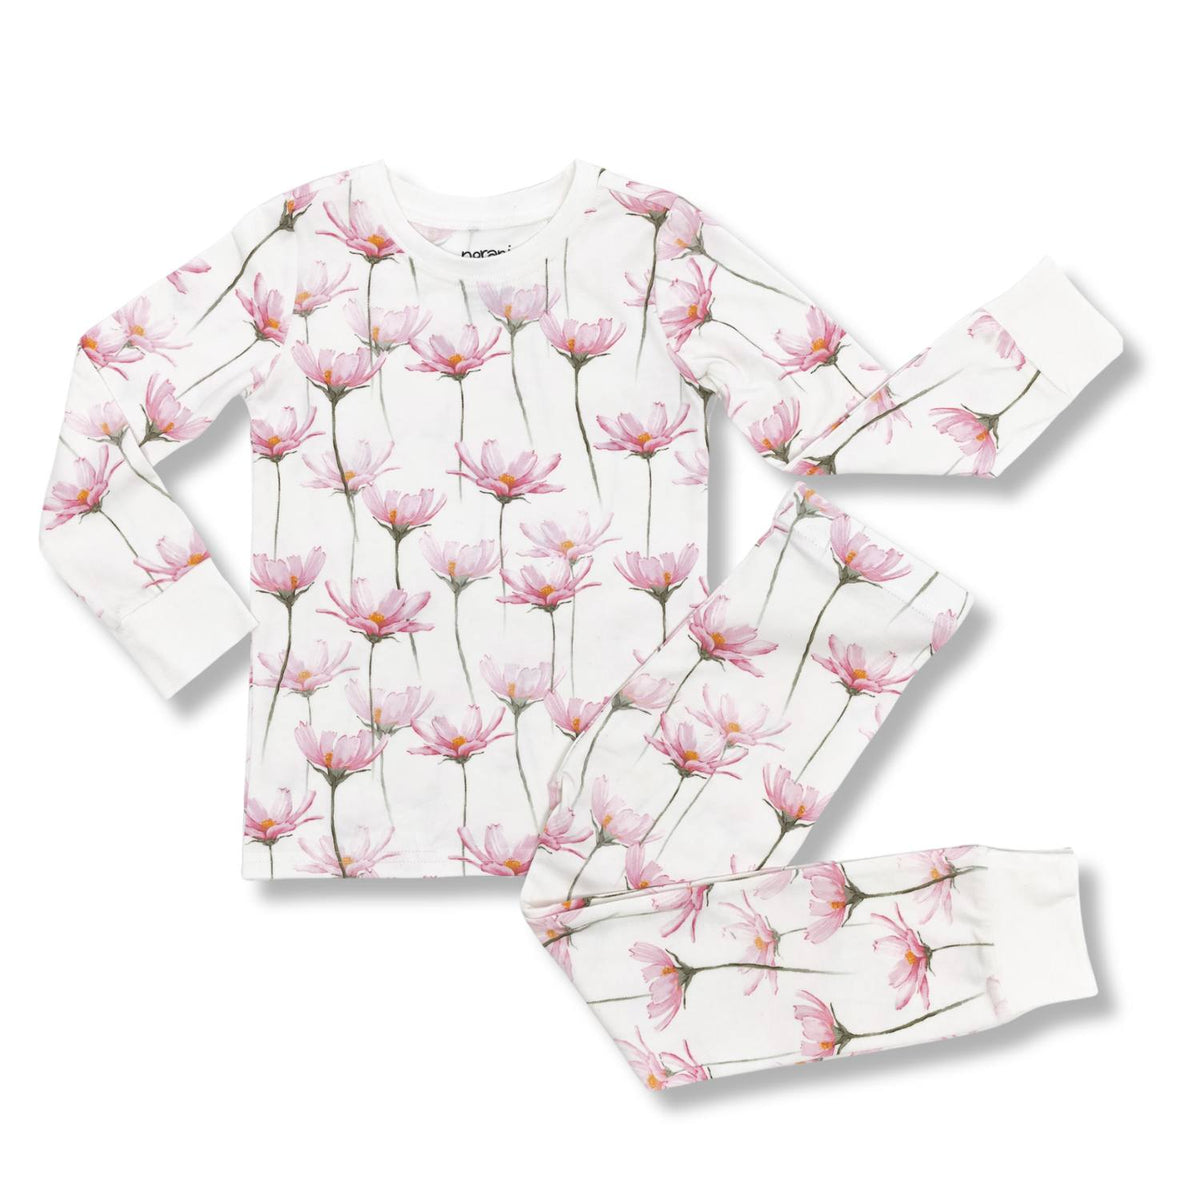  Norani Baby Long Sleeve Kids Pajamas in Pink and White Petals Flowers